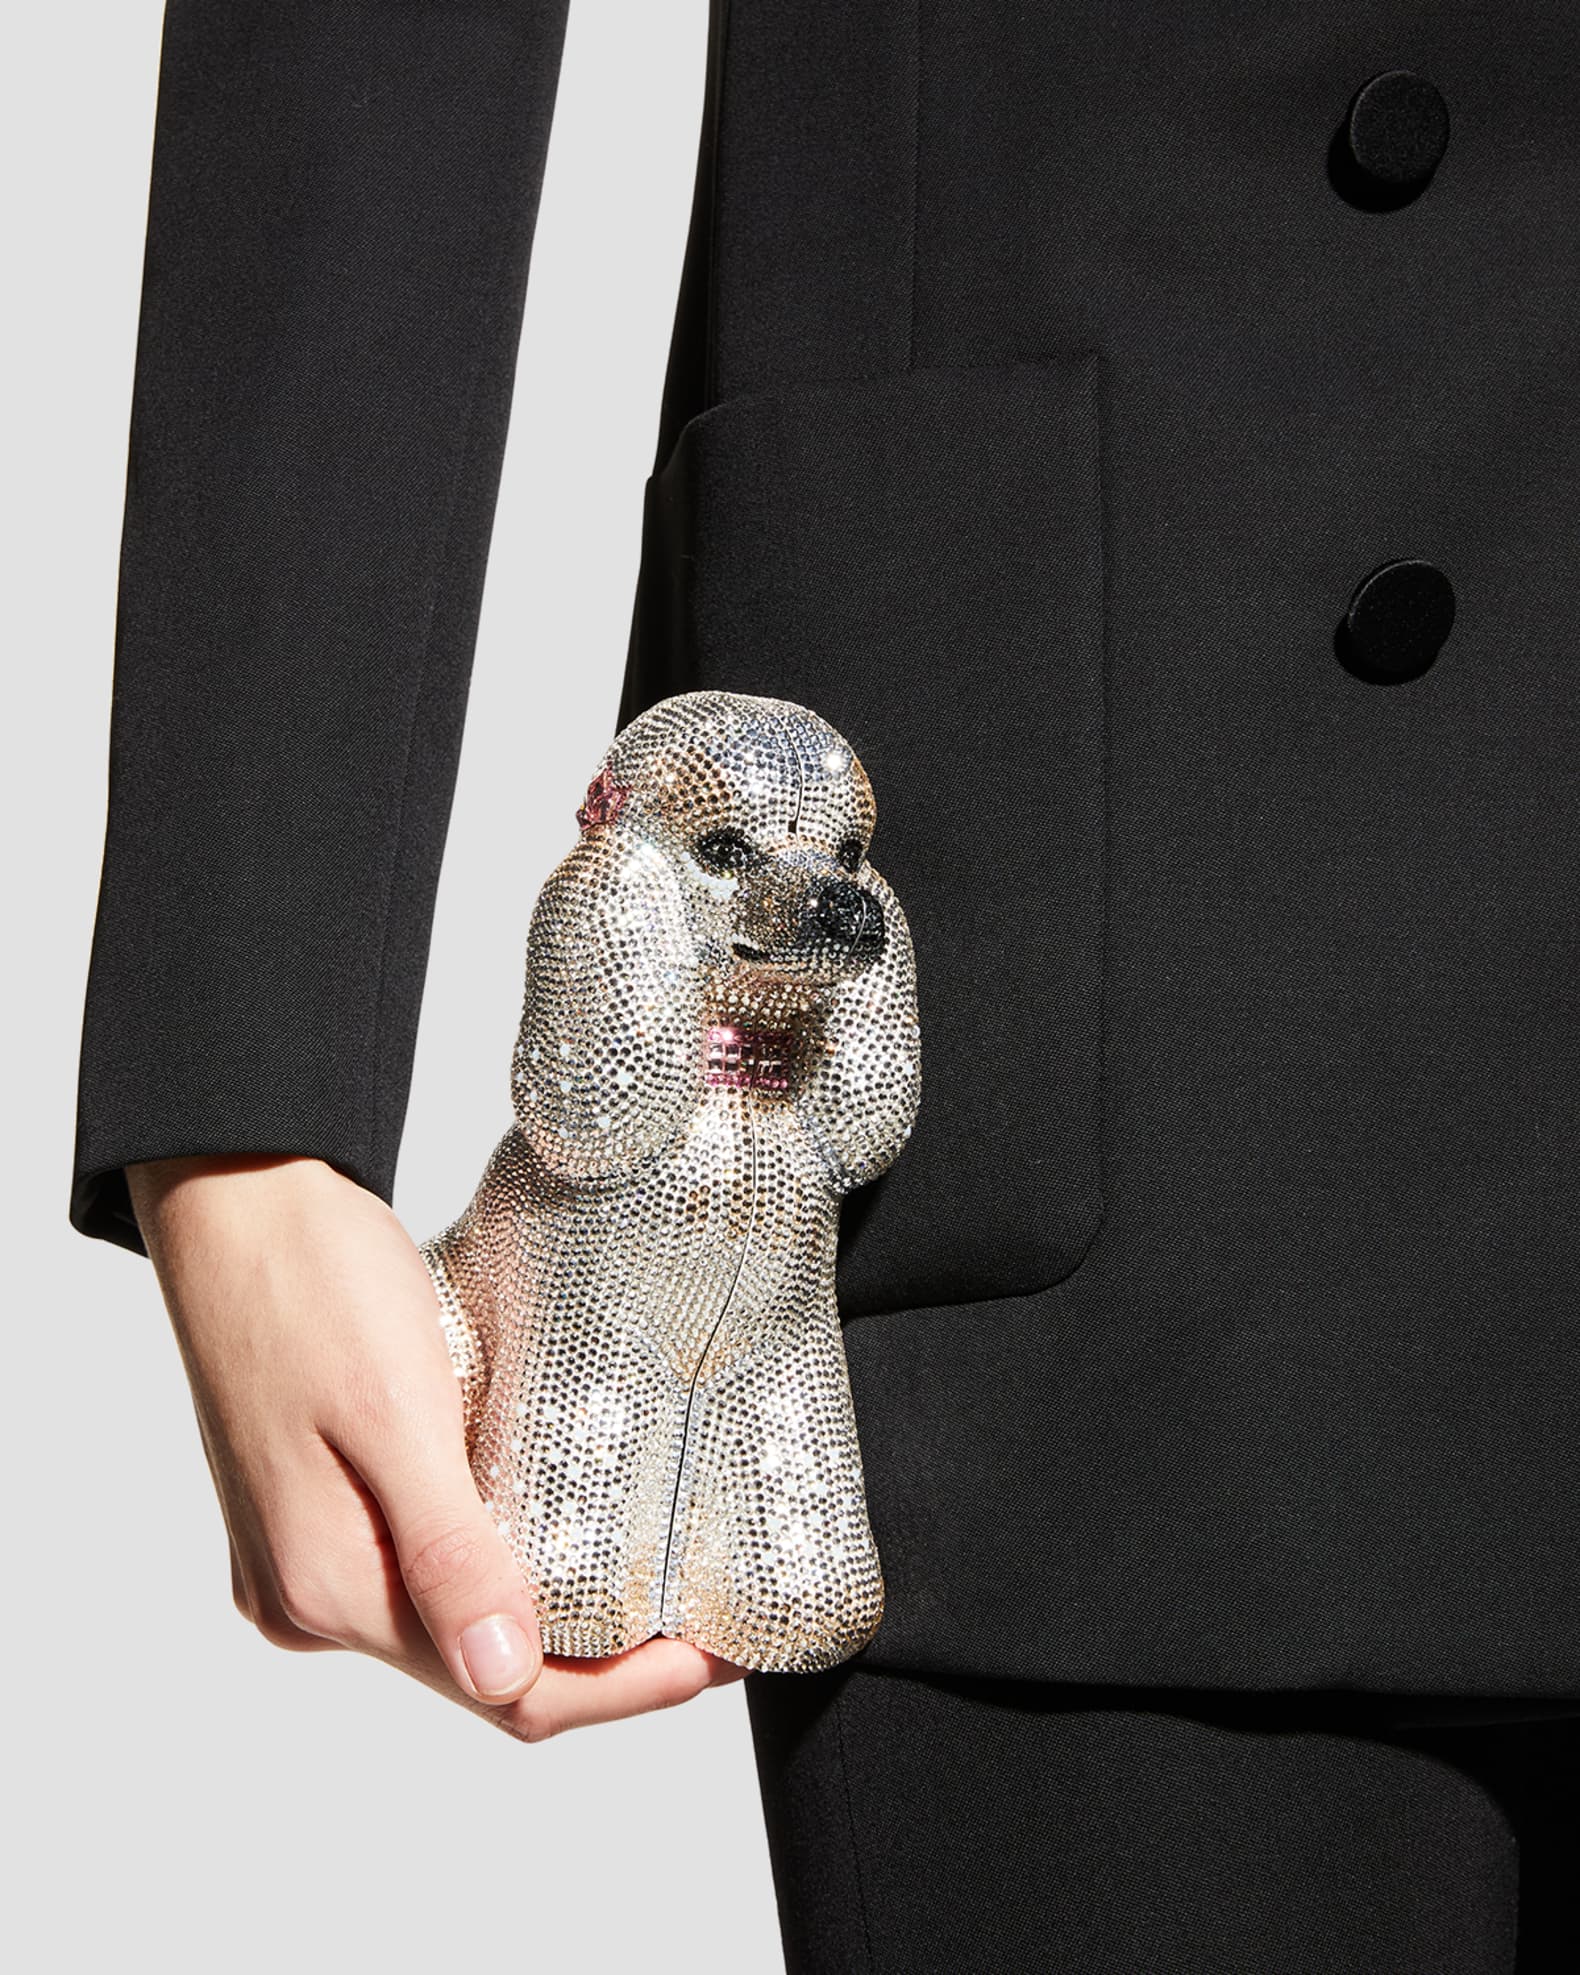 Judith Leiber French Poodle Crystal Clutch Bag in Black